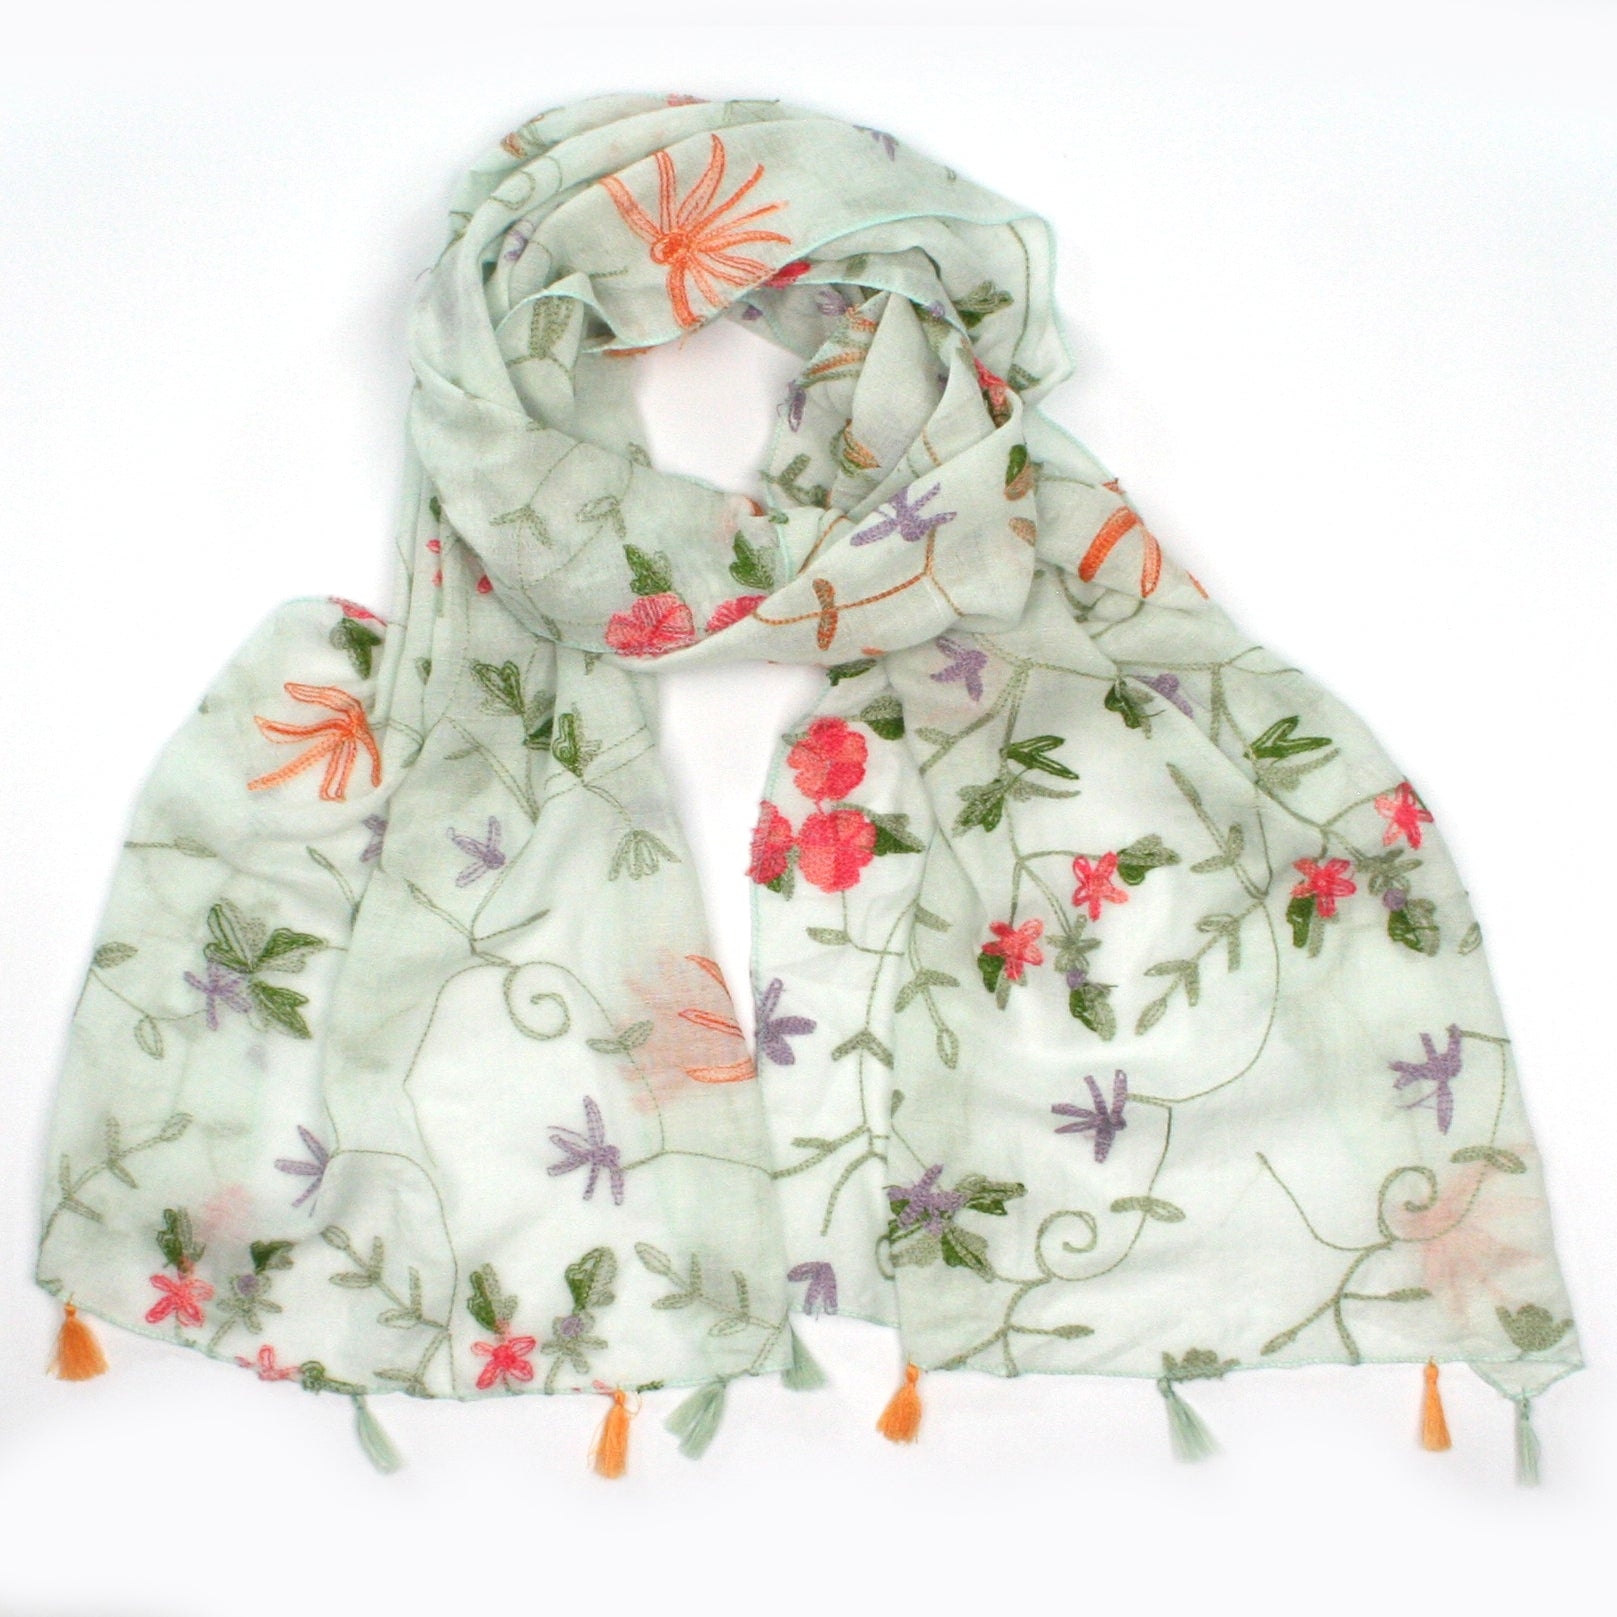 Embroidered Exotic Floral Pattern Scarf White – Stylish & Luxurious – Unisex – The Scarf Giraffe